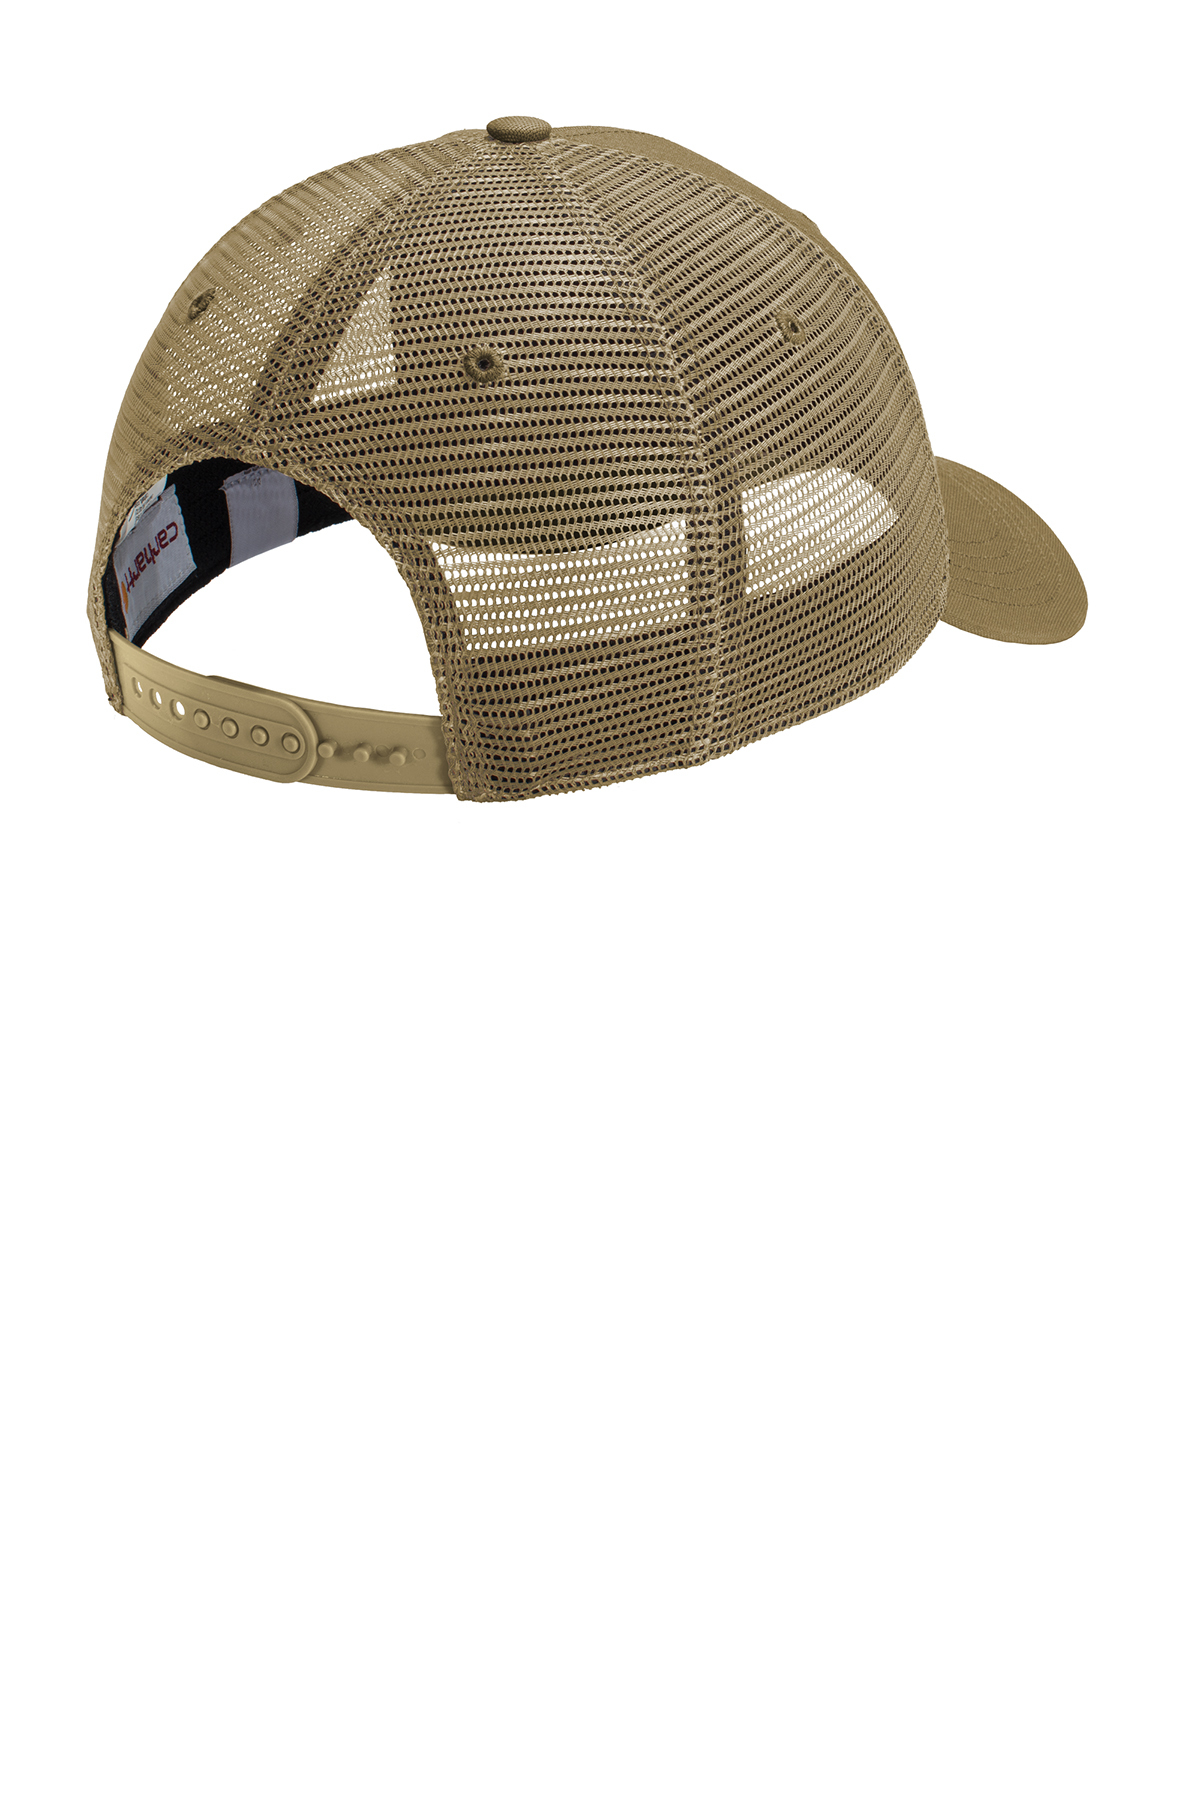 Carhartt Rugged Professional Series Cap | Product | Company Casuals